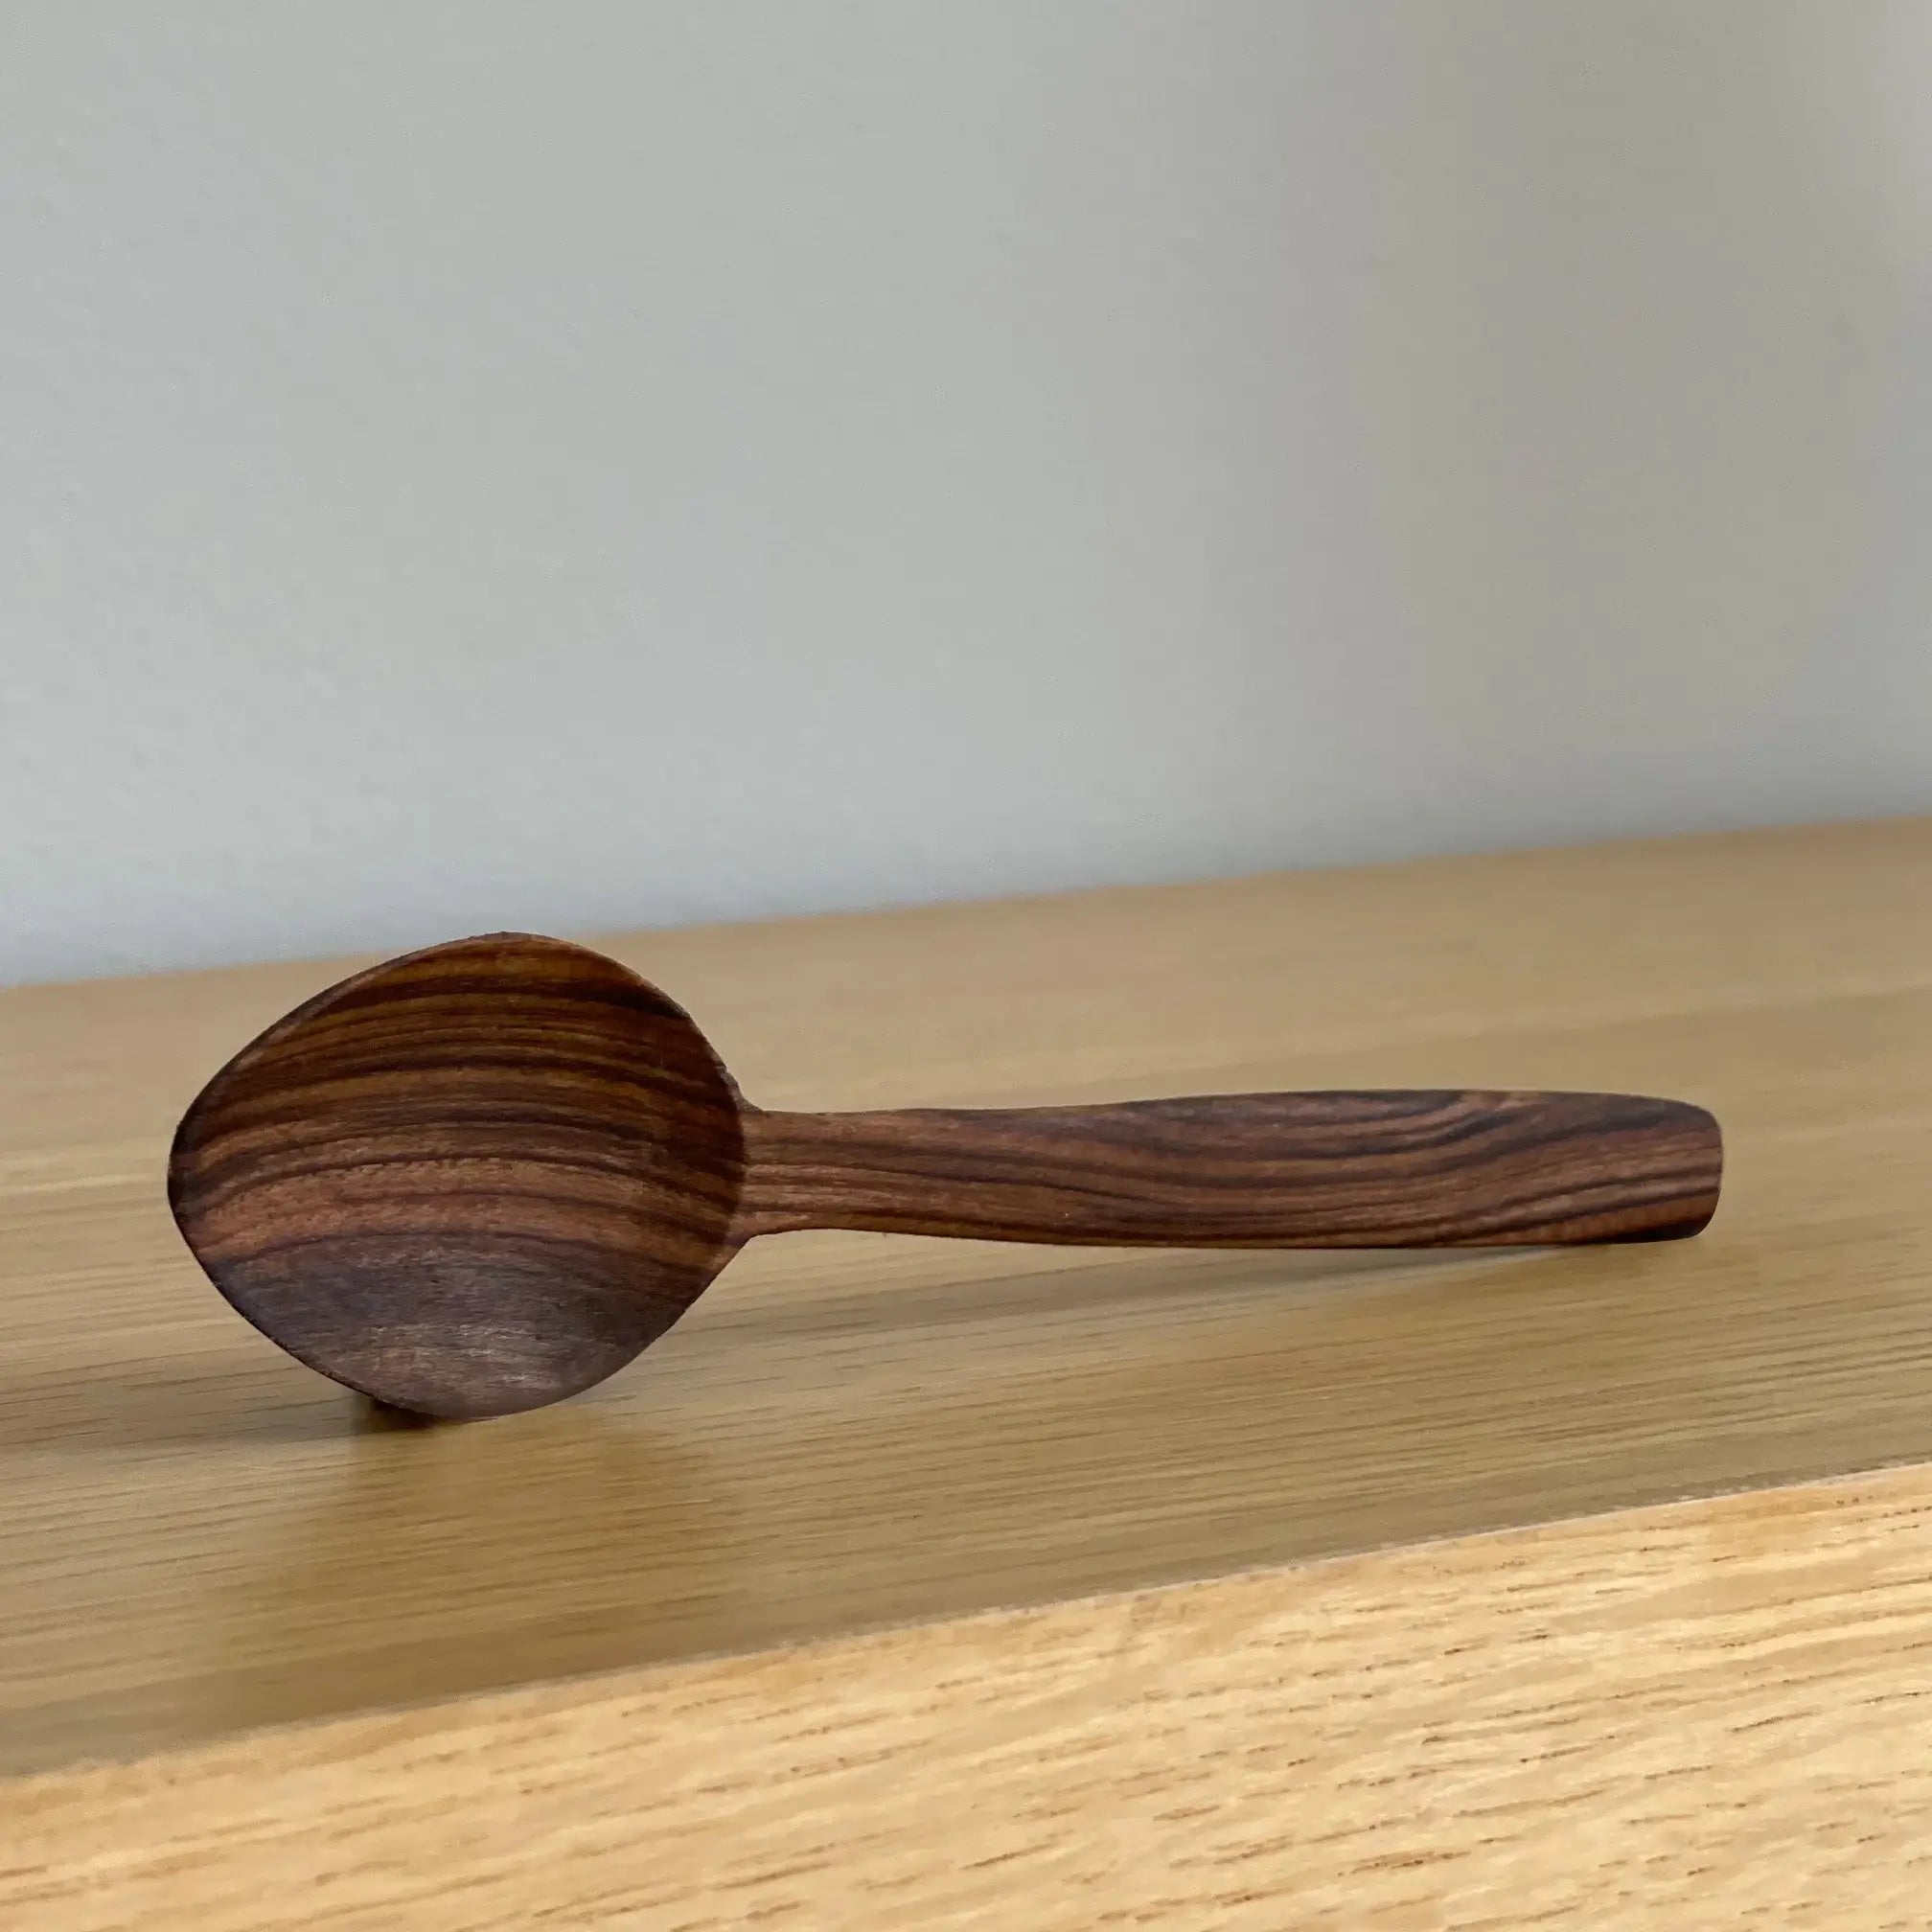 Dounia home Tea spoons in  made of Walnut wood, Side Shot View